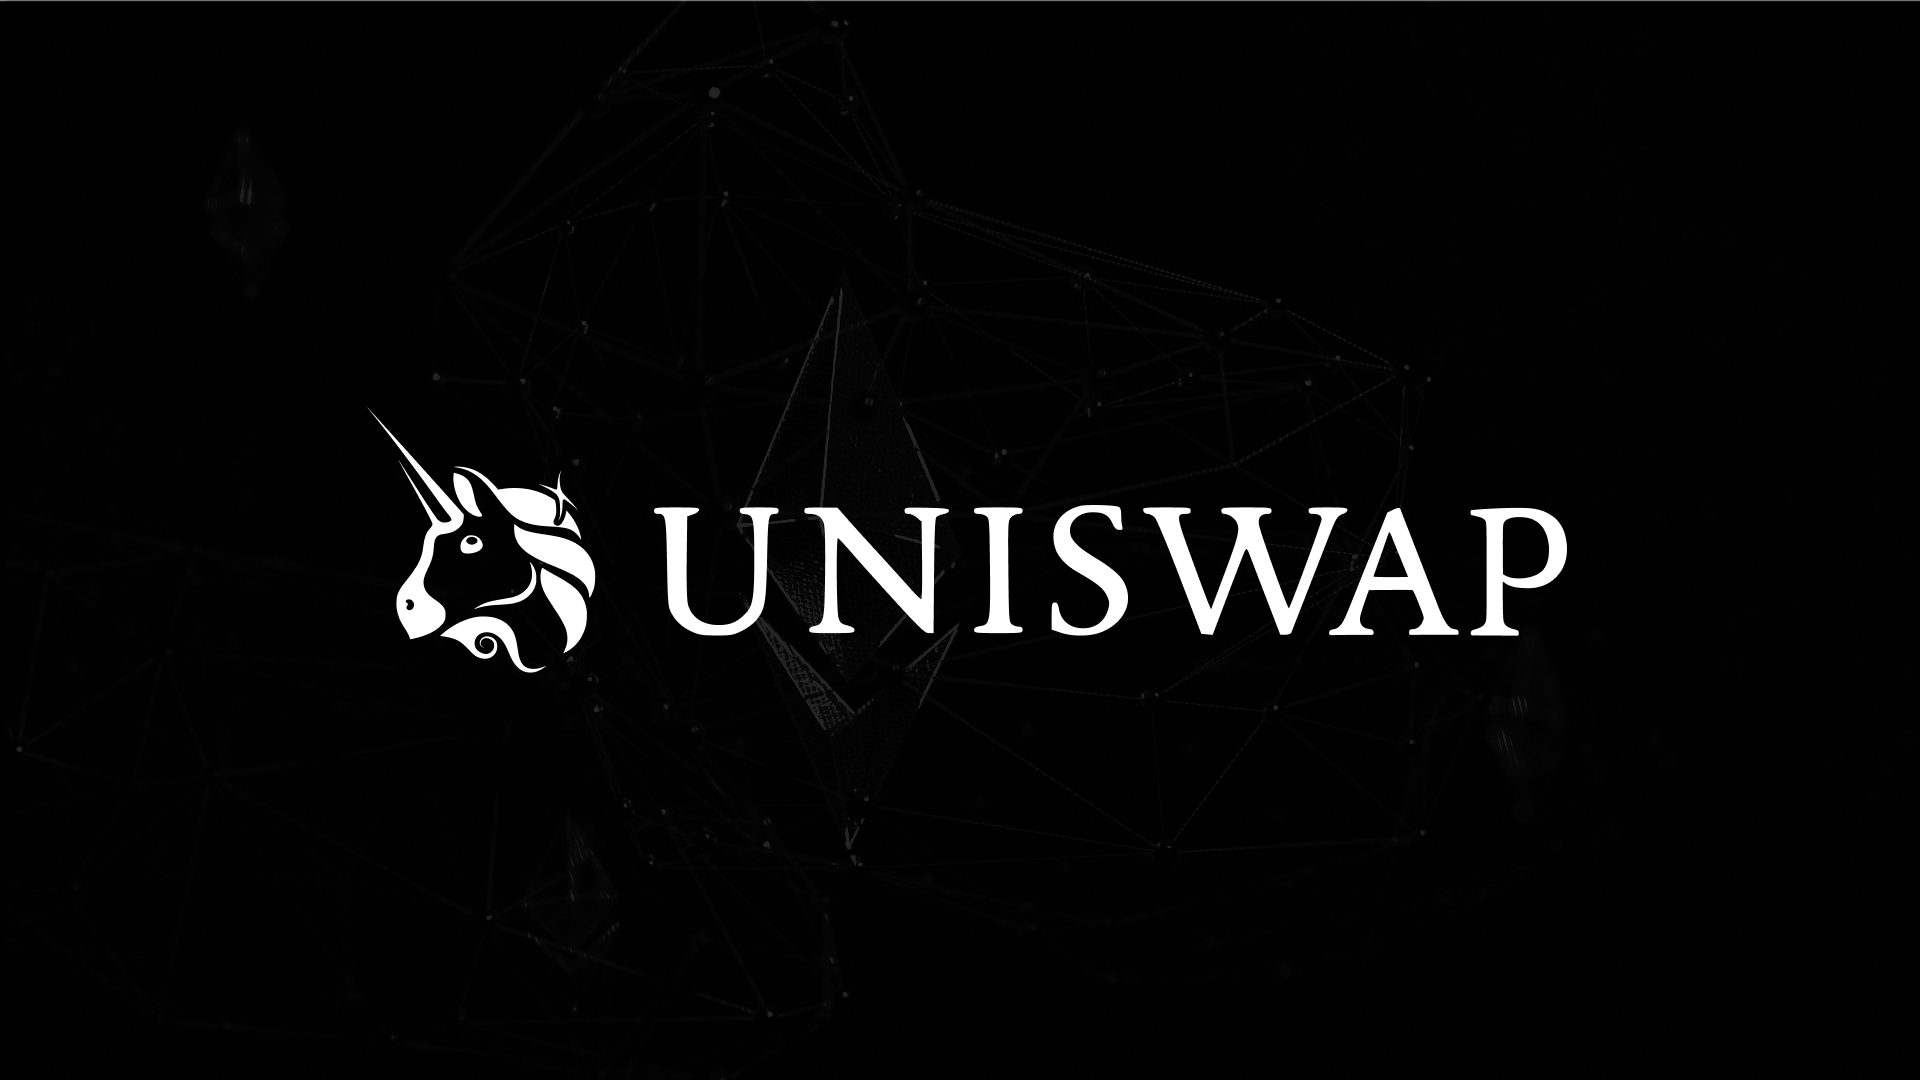 Uniswap Aligns with Wormhole and Axelar for Cross-Chain Bridging